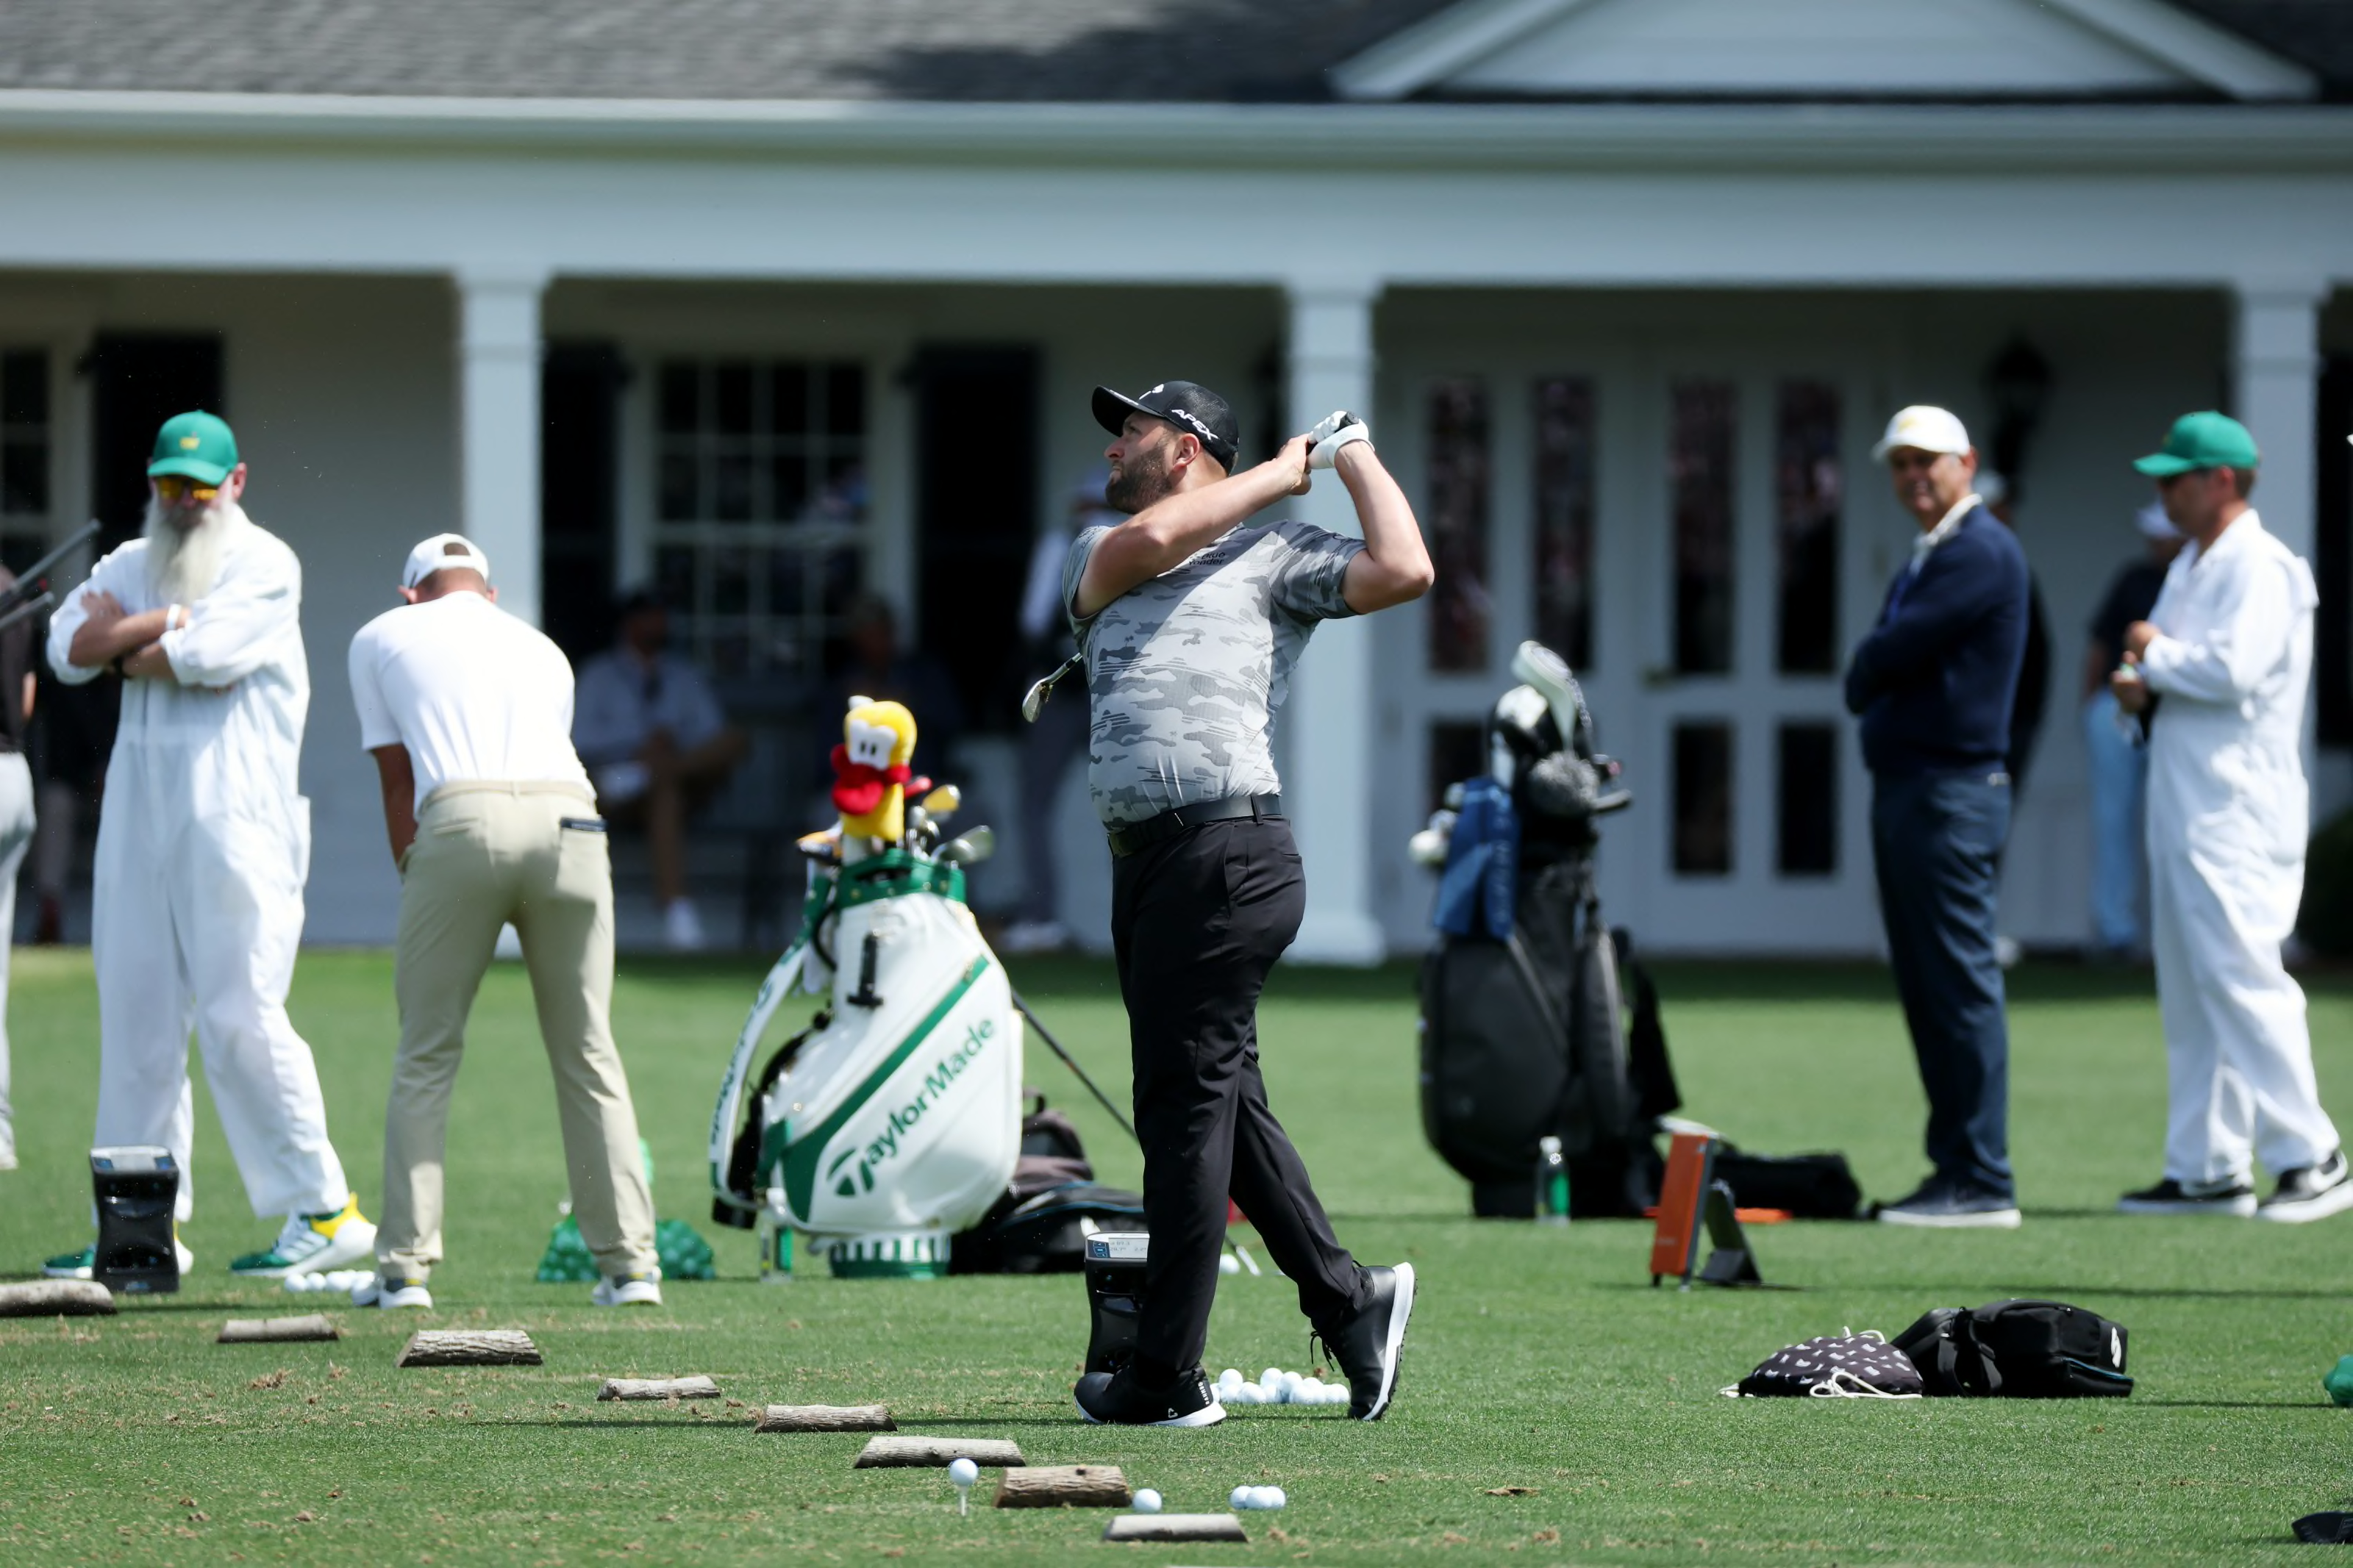 "Masters on the Range" 15 Golfers Spotlighted at Monday Practice